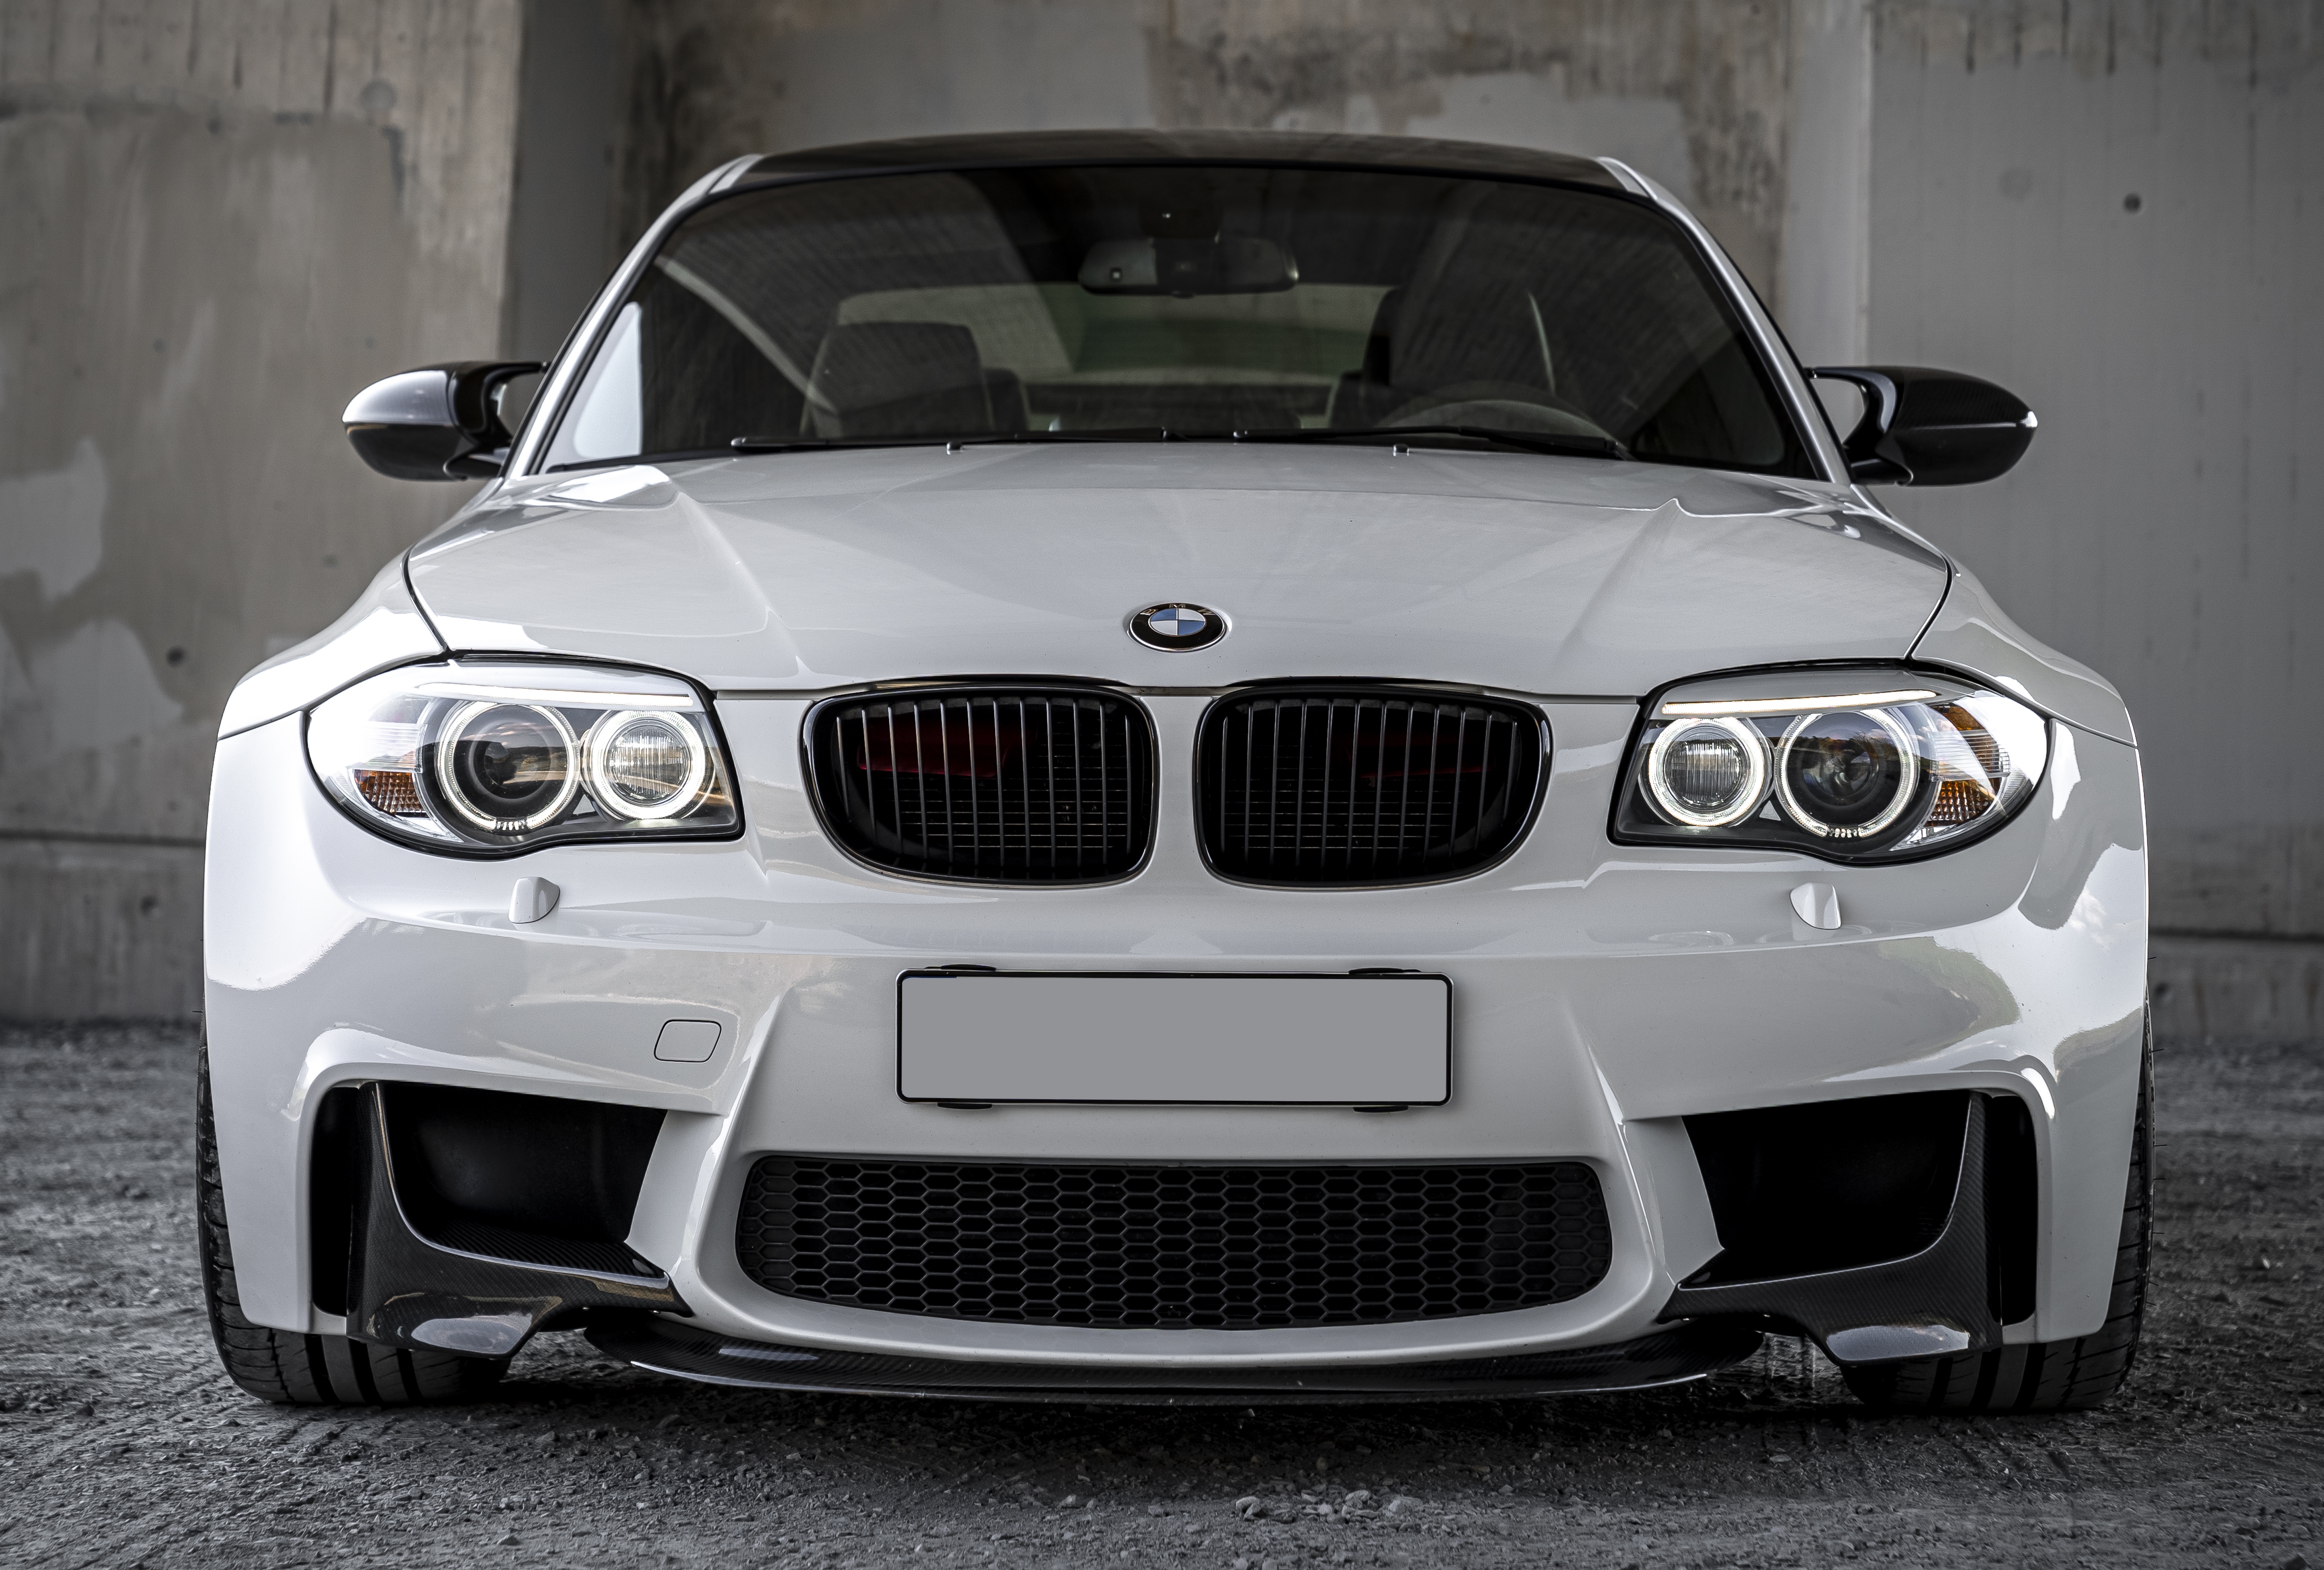 https://www.perl-carbon.de/media/image/07/05/5f/11_04_2020_Carshooting_BMW_M1_Coupe_ohne_NS_08.jpg